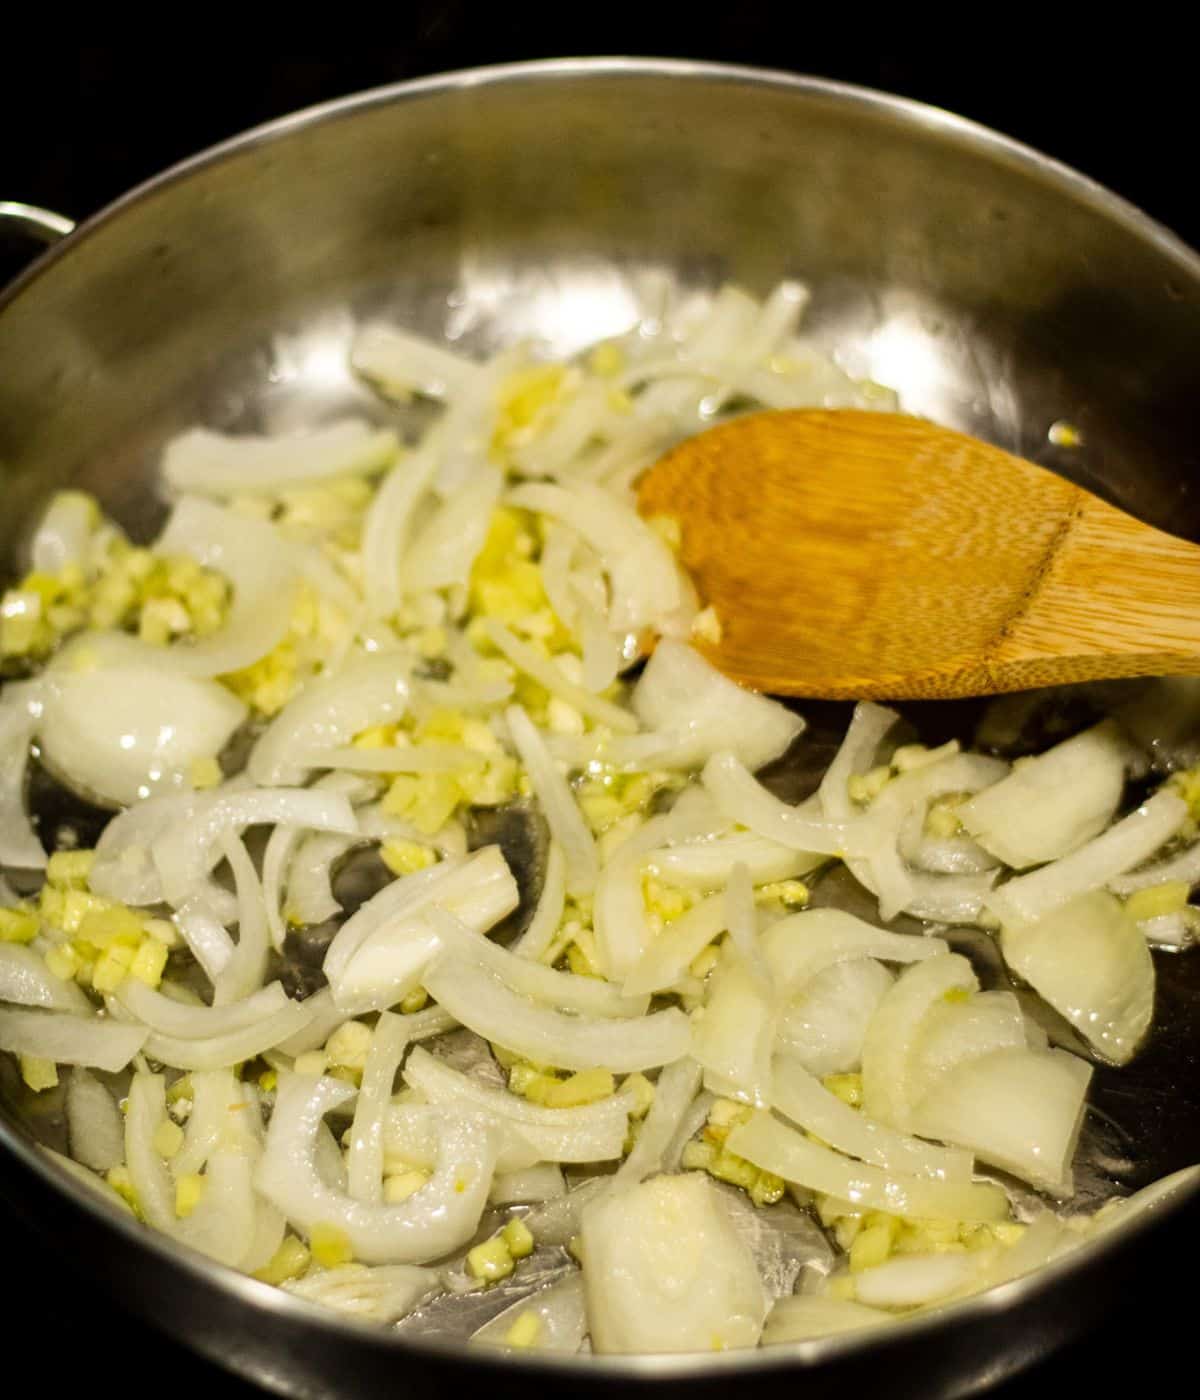 Sauted onion, garlic, and ginger in a skillet.